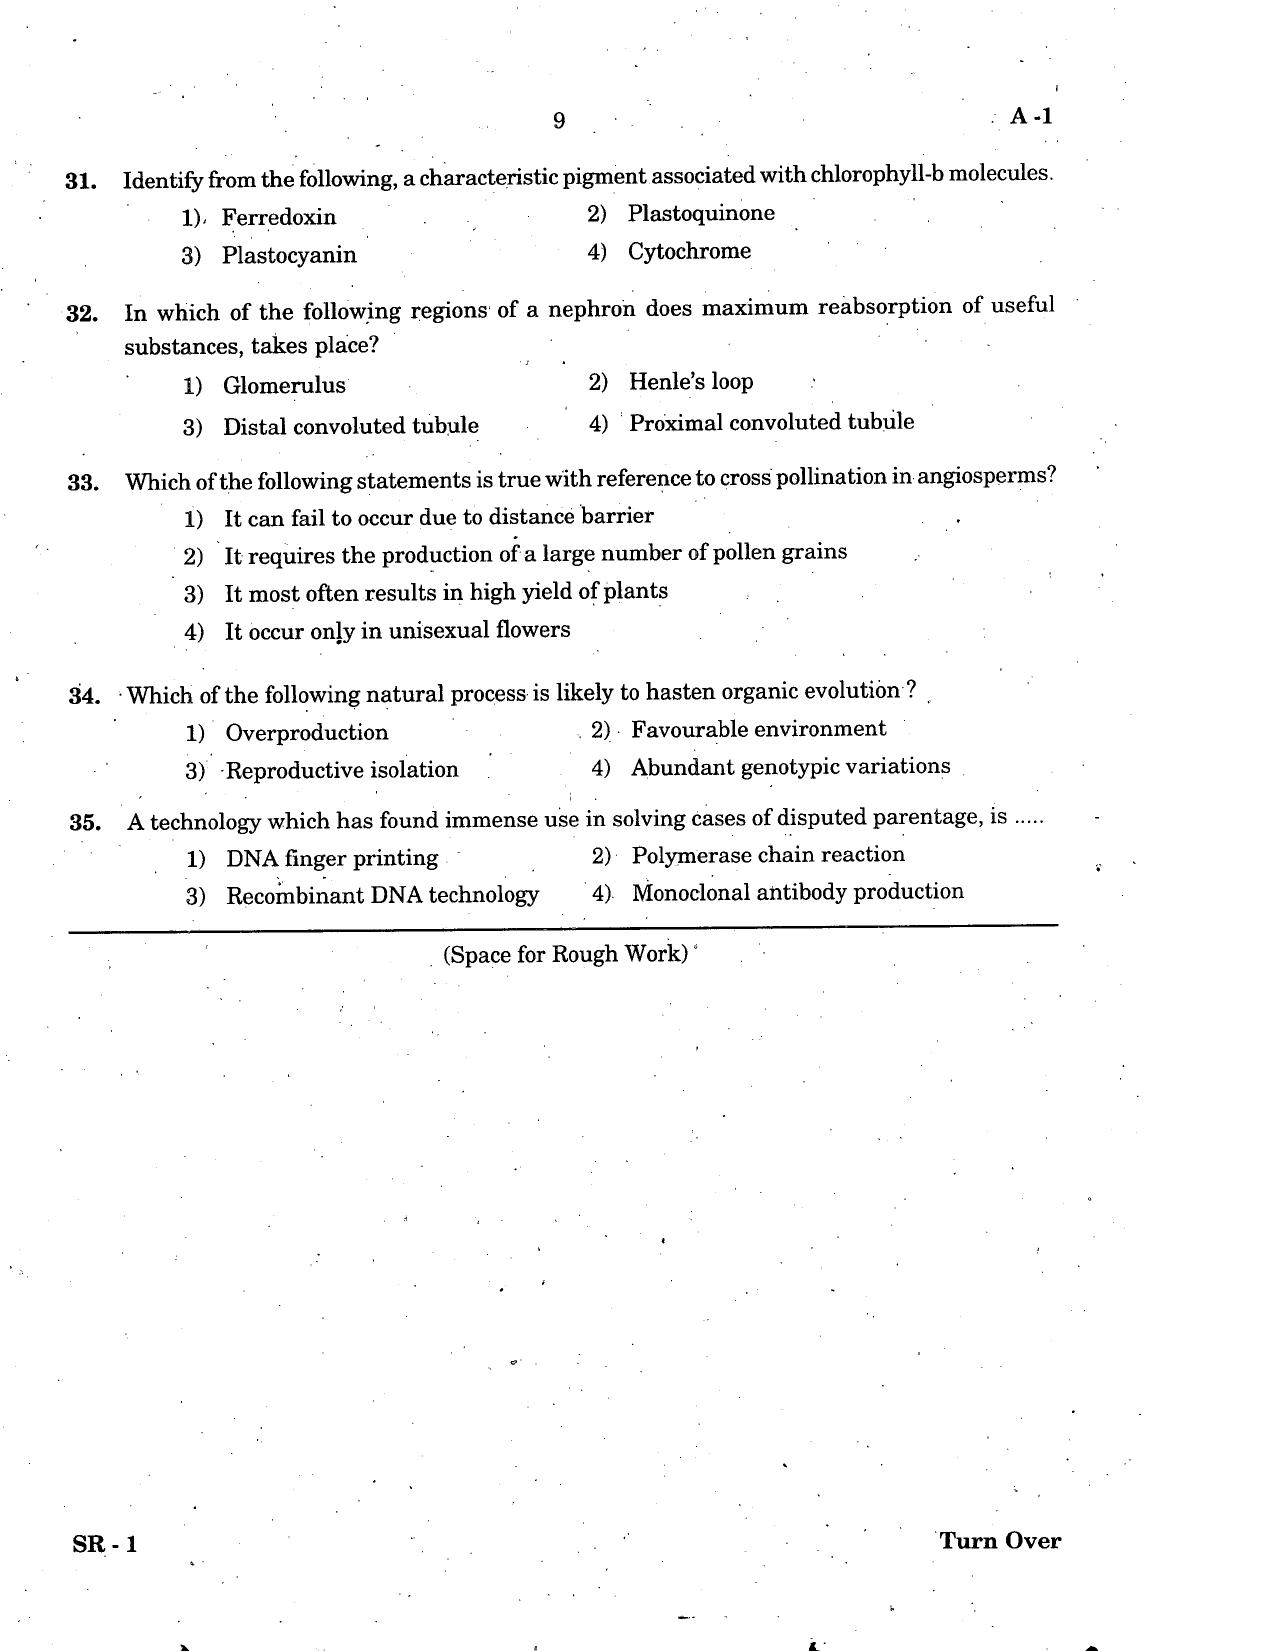 KCET Biology 2005 Question Papers - Page 9